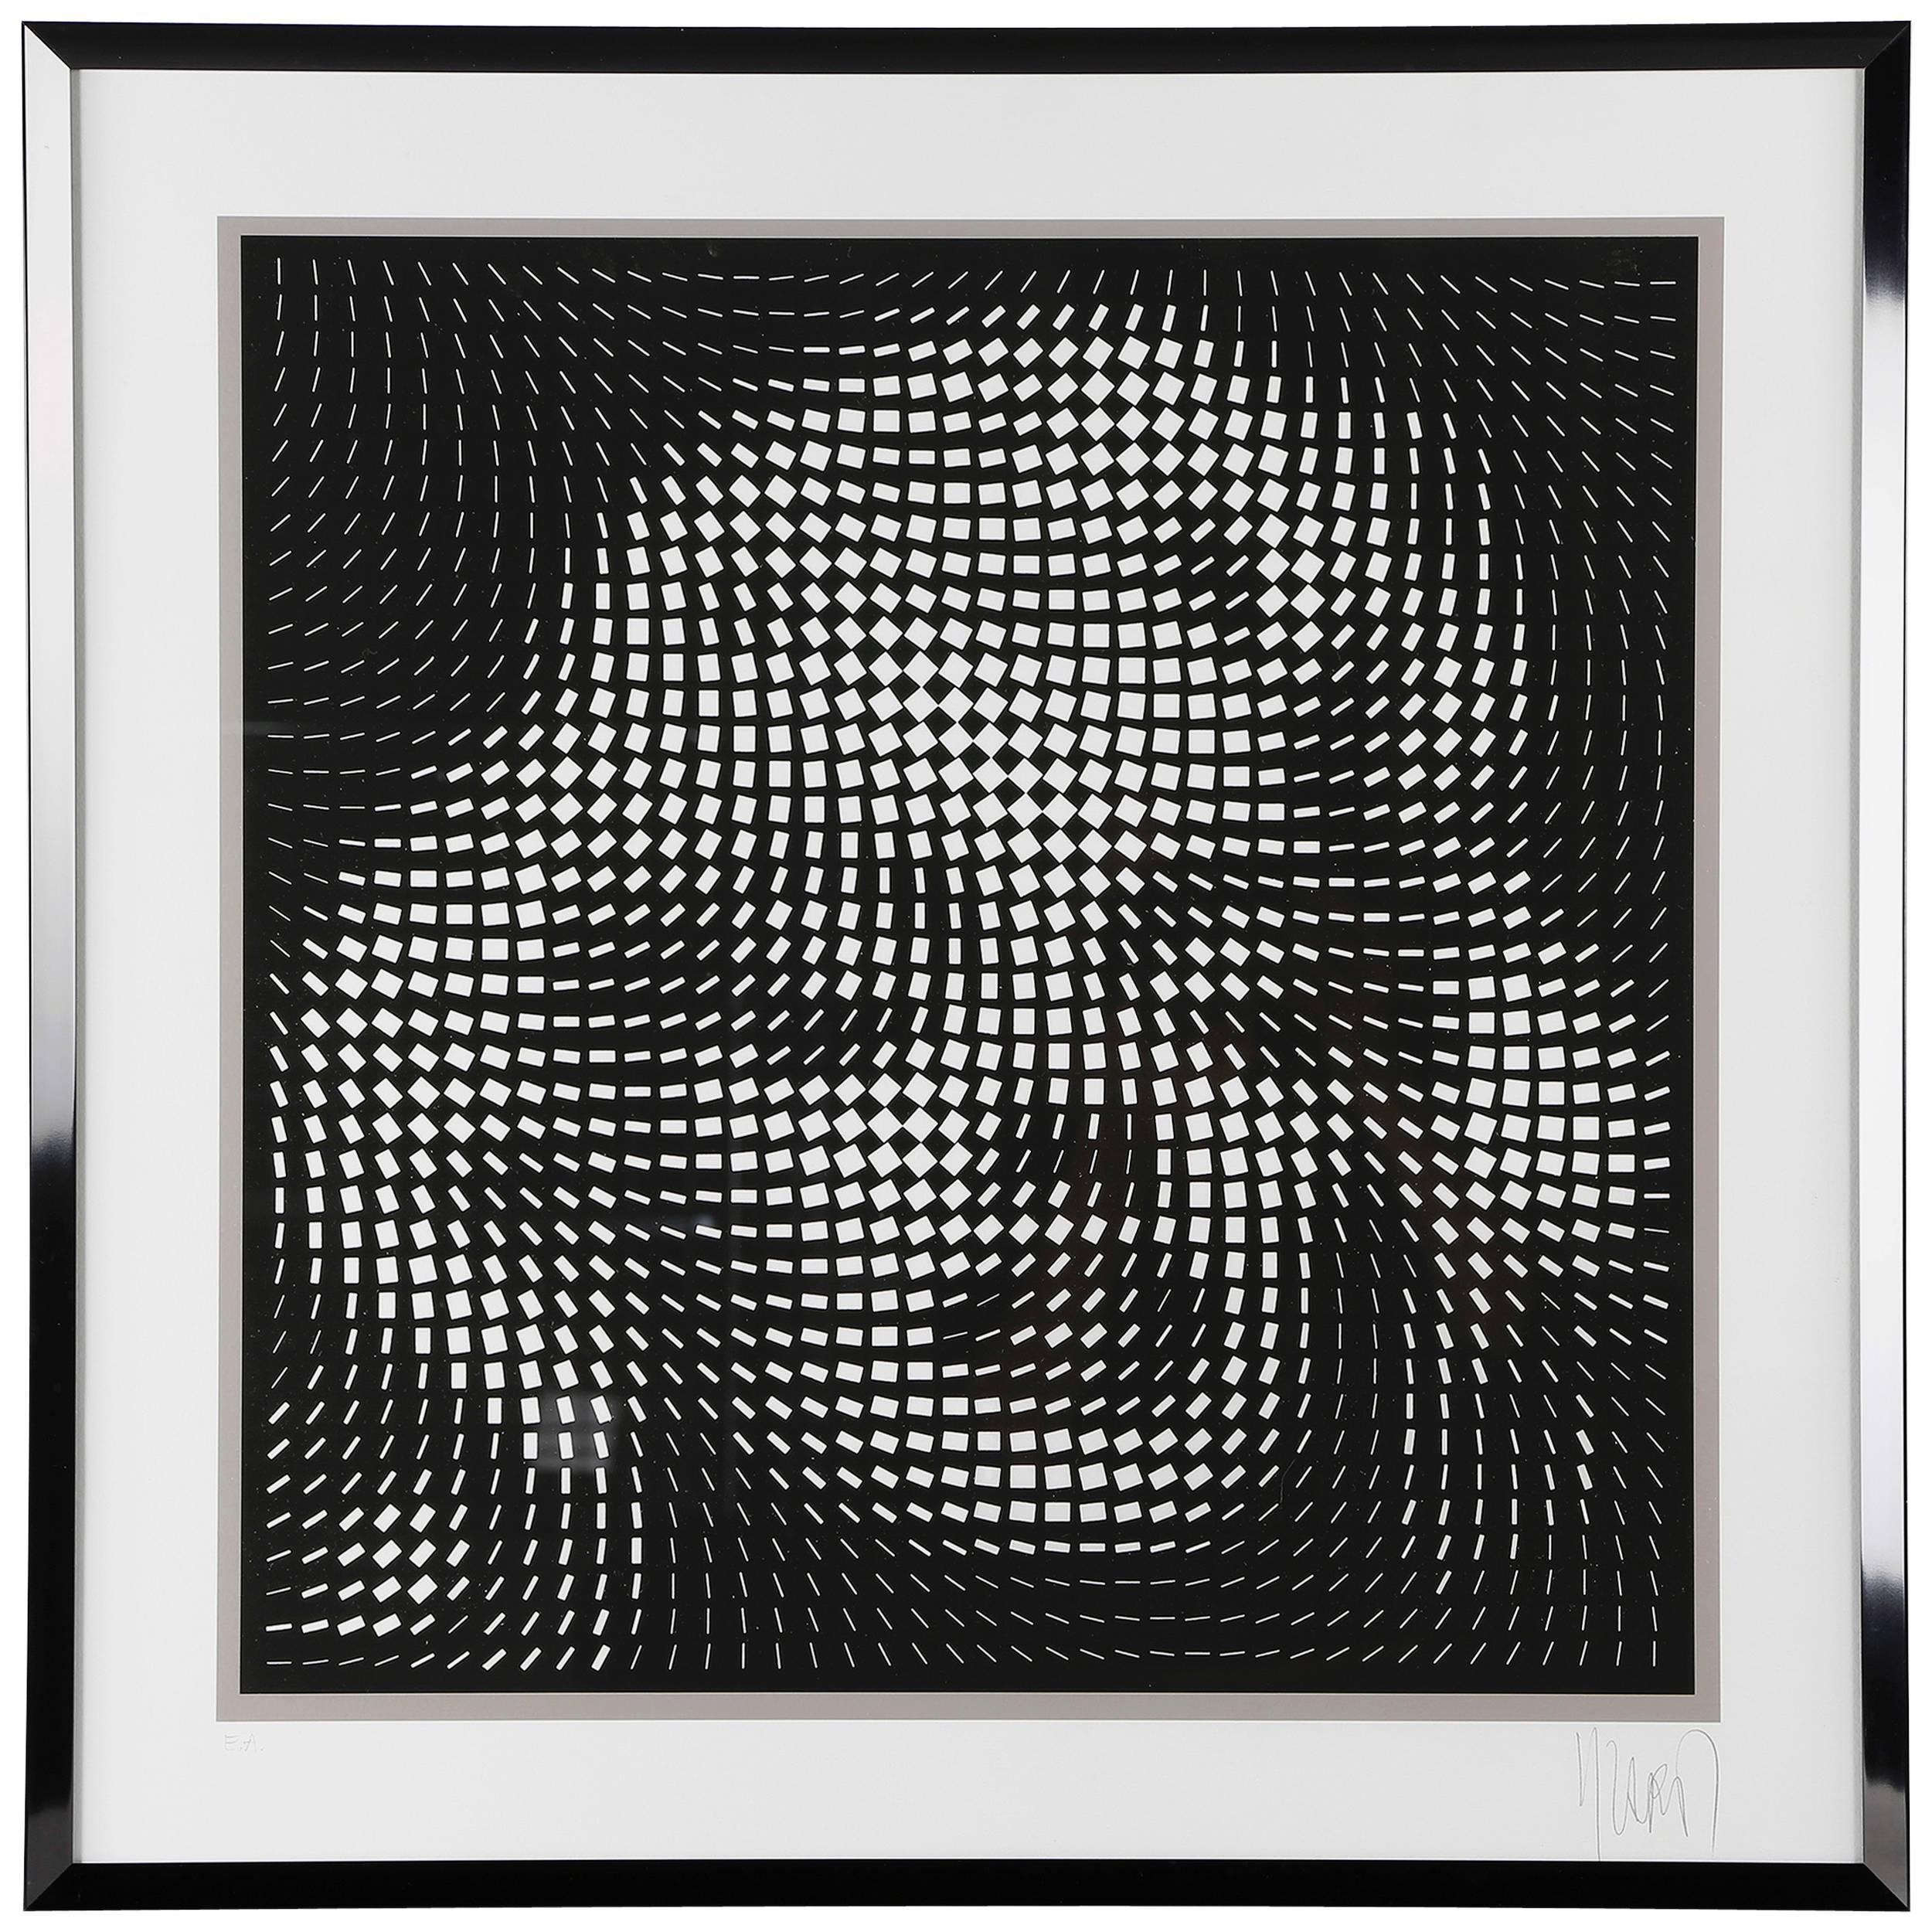 Yvaral, Marilyn, Serigraph For Sale